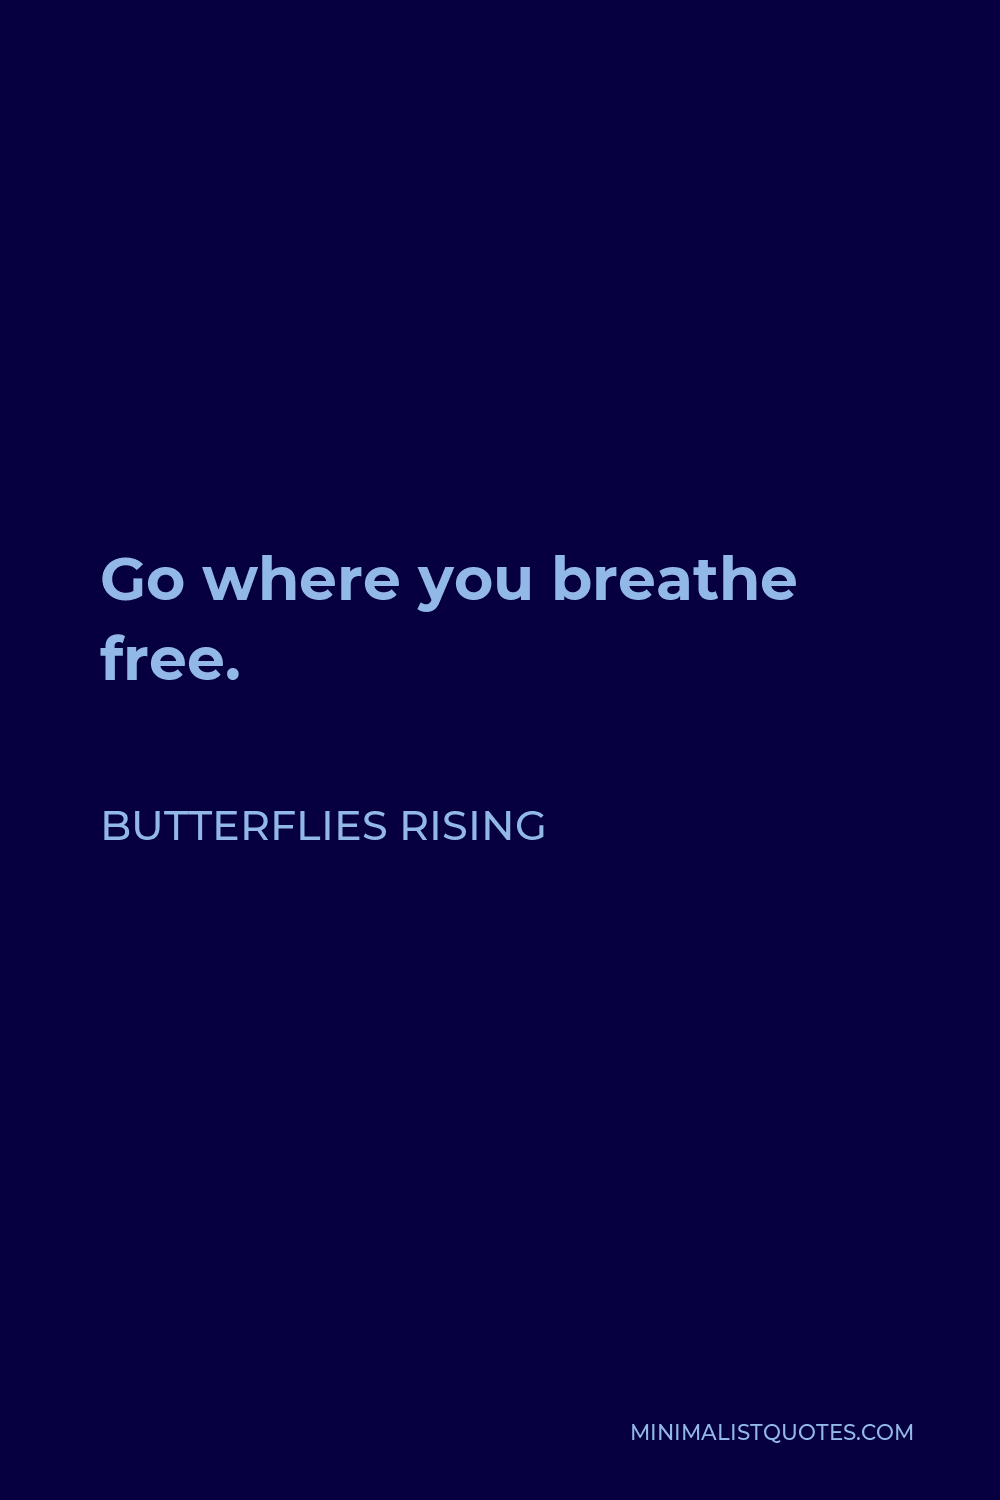 Butterflies Rising Quote - Go where you breathe free.